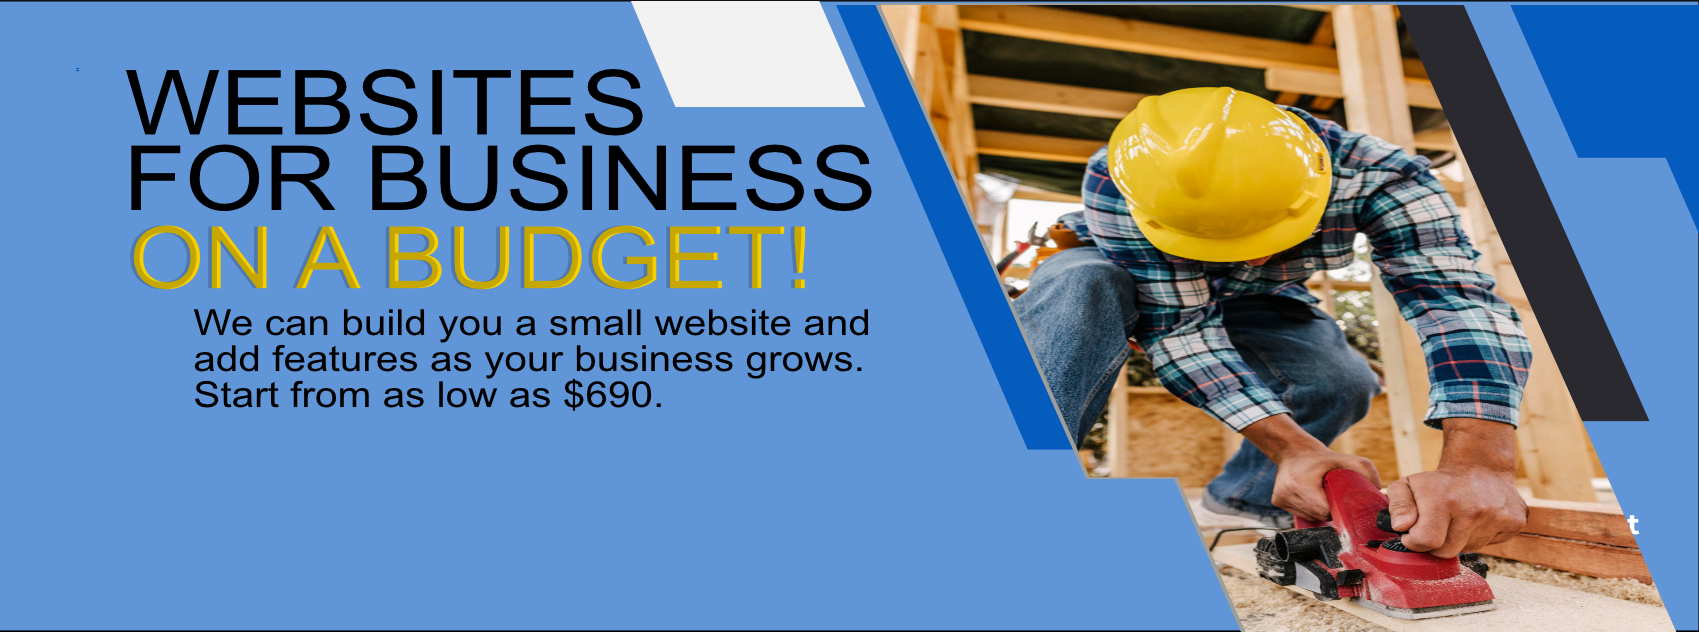 Websites for new-business on a budget.  4 page website with contact page form from $490